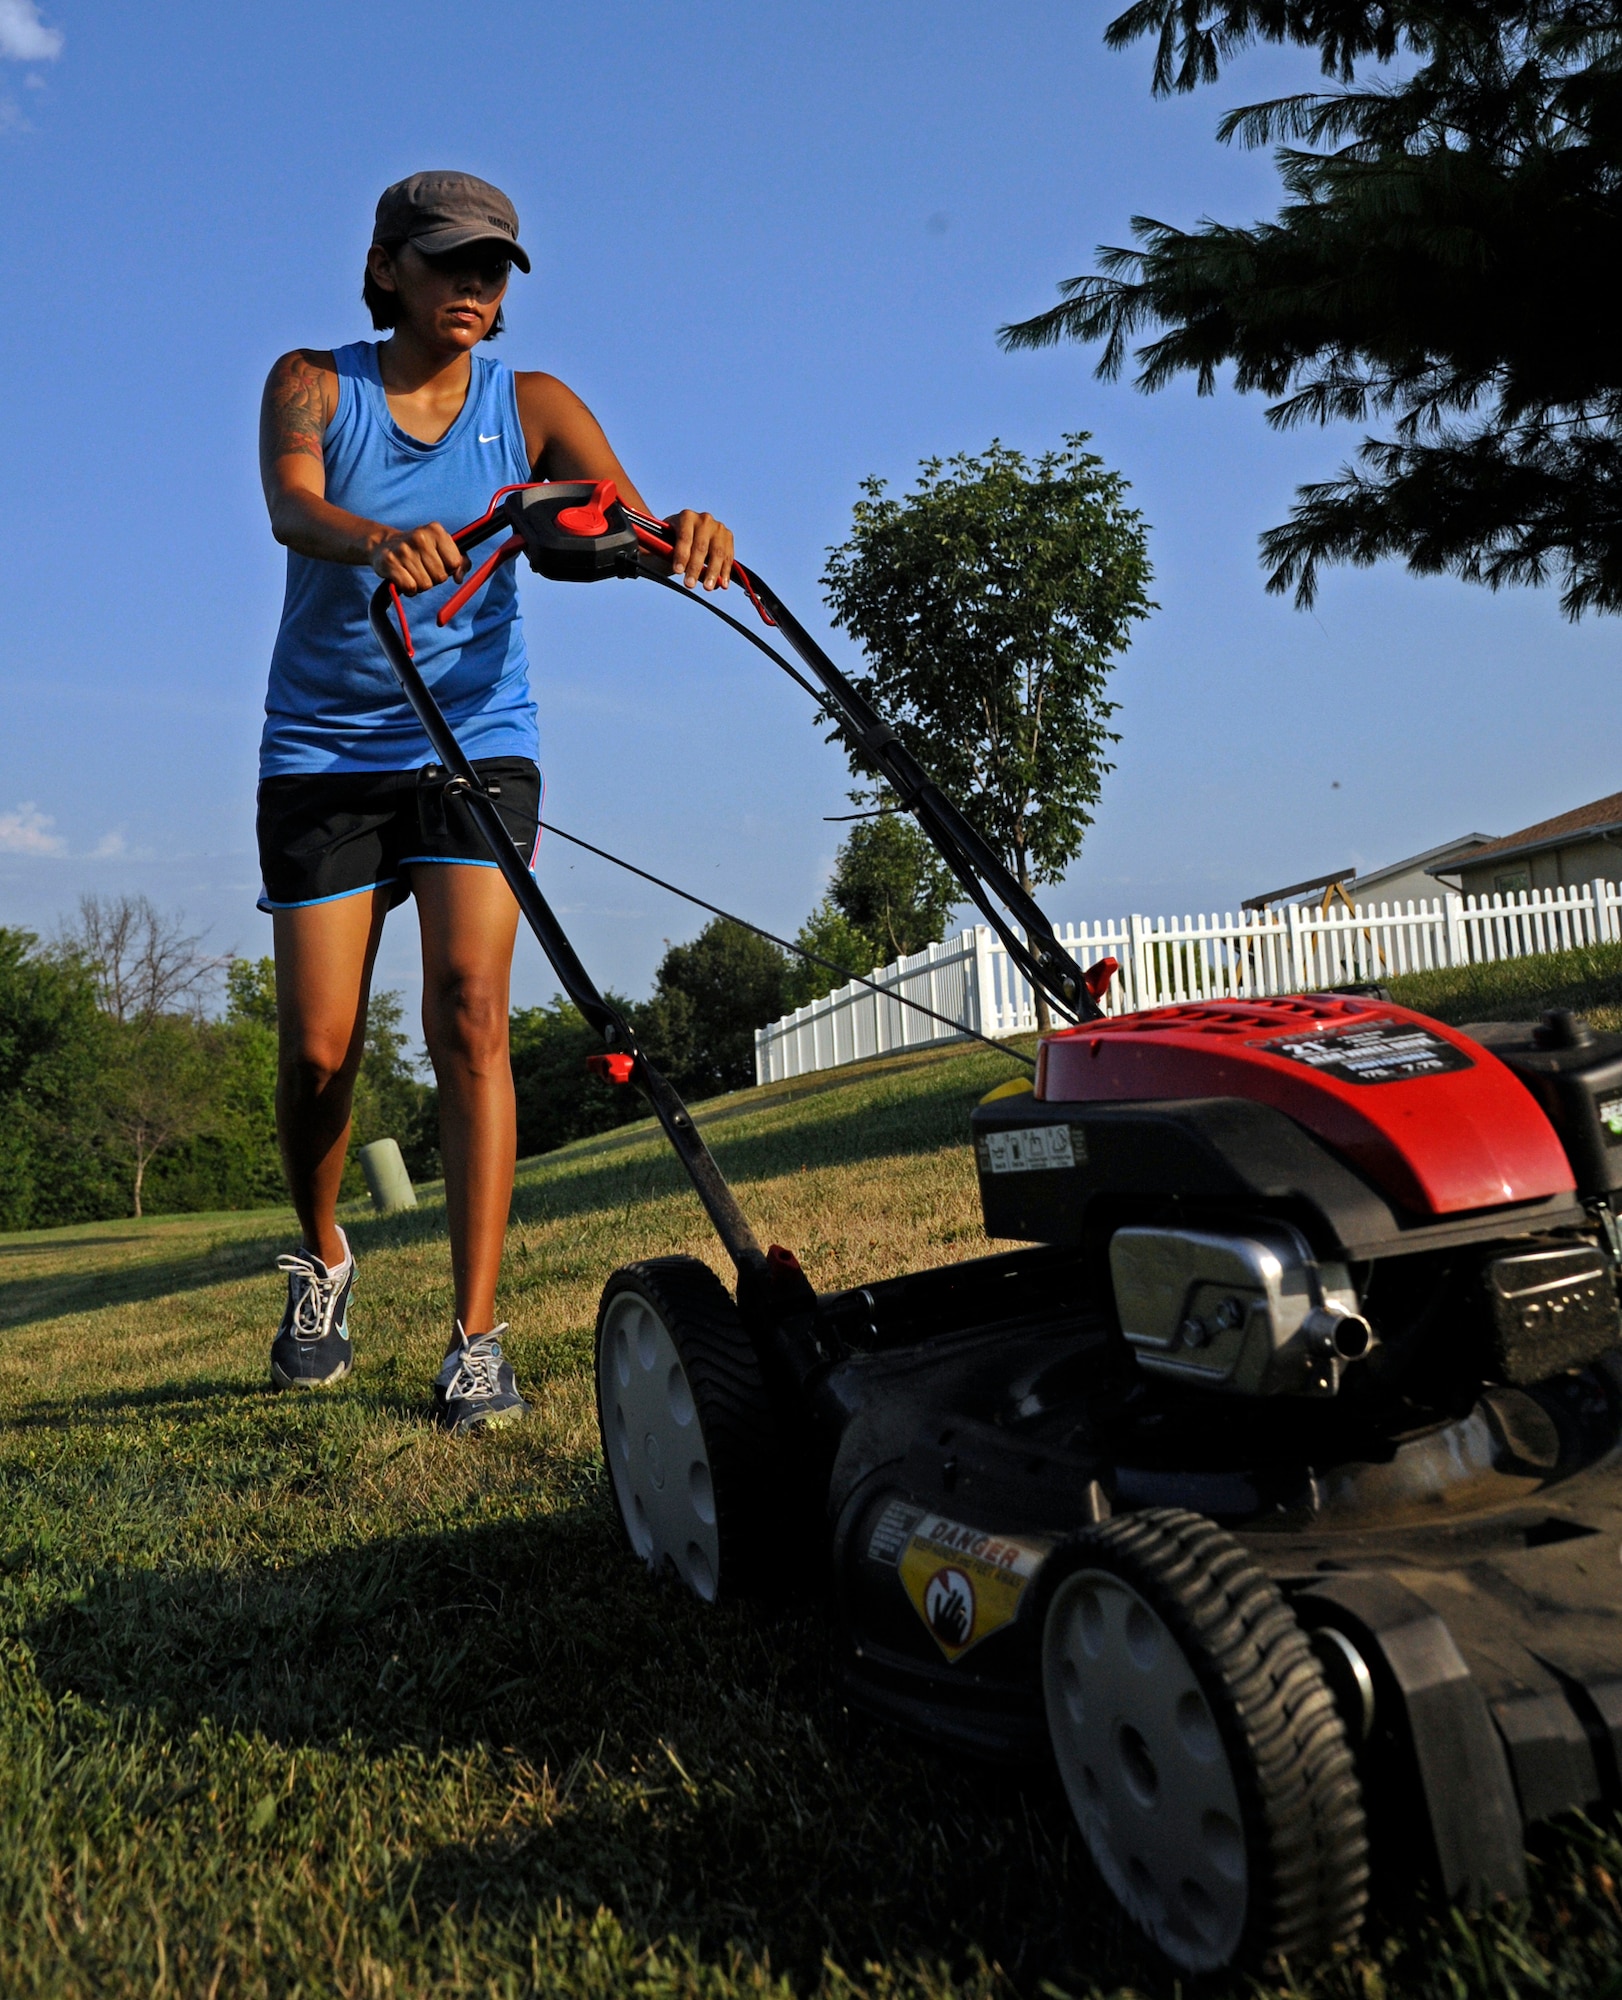 WHITEMAN AIR FORCE BASE, Mo. - Gina Daniel, wife of Staff Sgt. Steven Daniel, 509th Maintenance Squadron, mowes her lawn July 28, 2011. The base housing office here recommends mowing as necessary to maintain a neat appearance. Specific requirements can be found in a brochure at the base housing office here. (U.S. Air Force photo by Airman 1st Class Cody H. Ramirez)